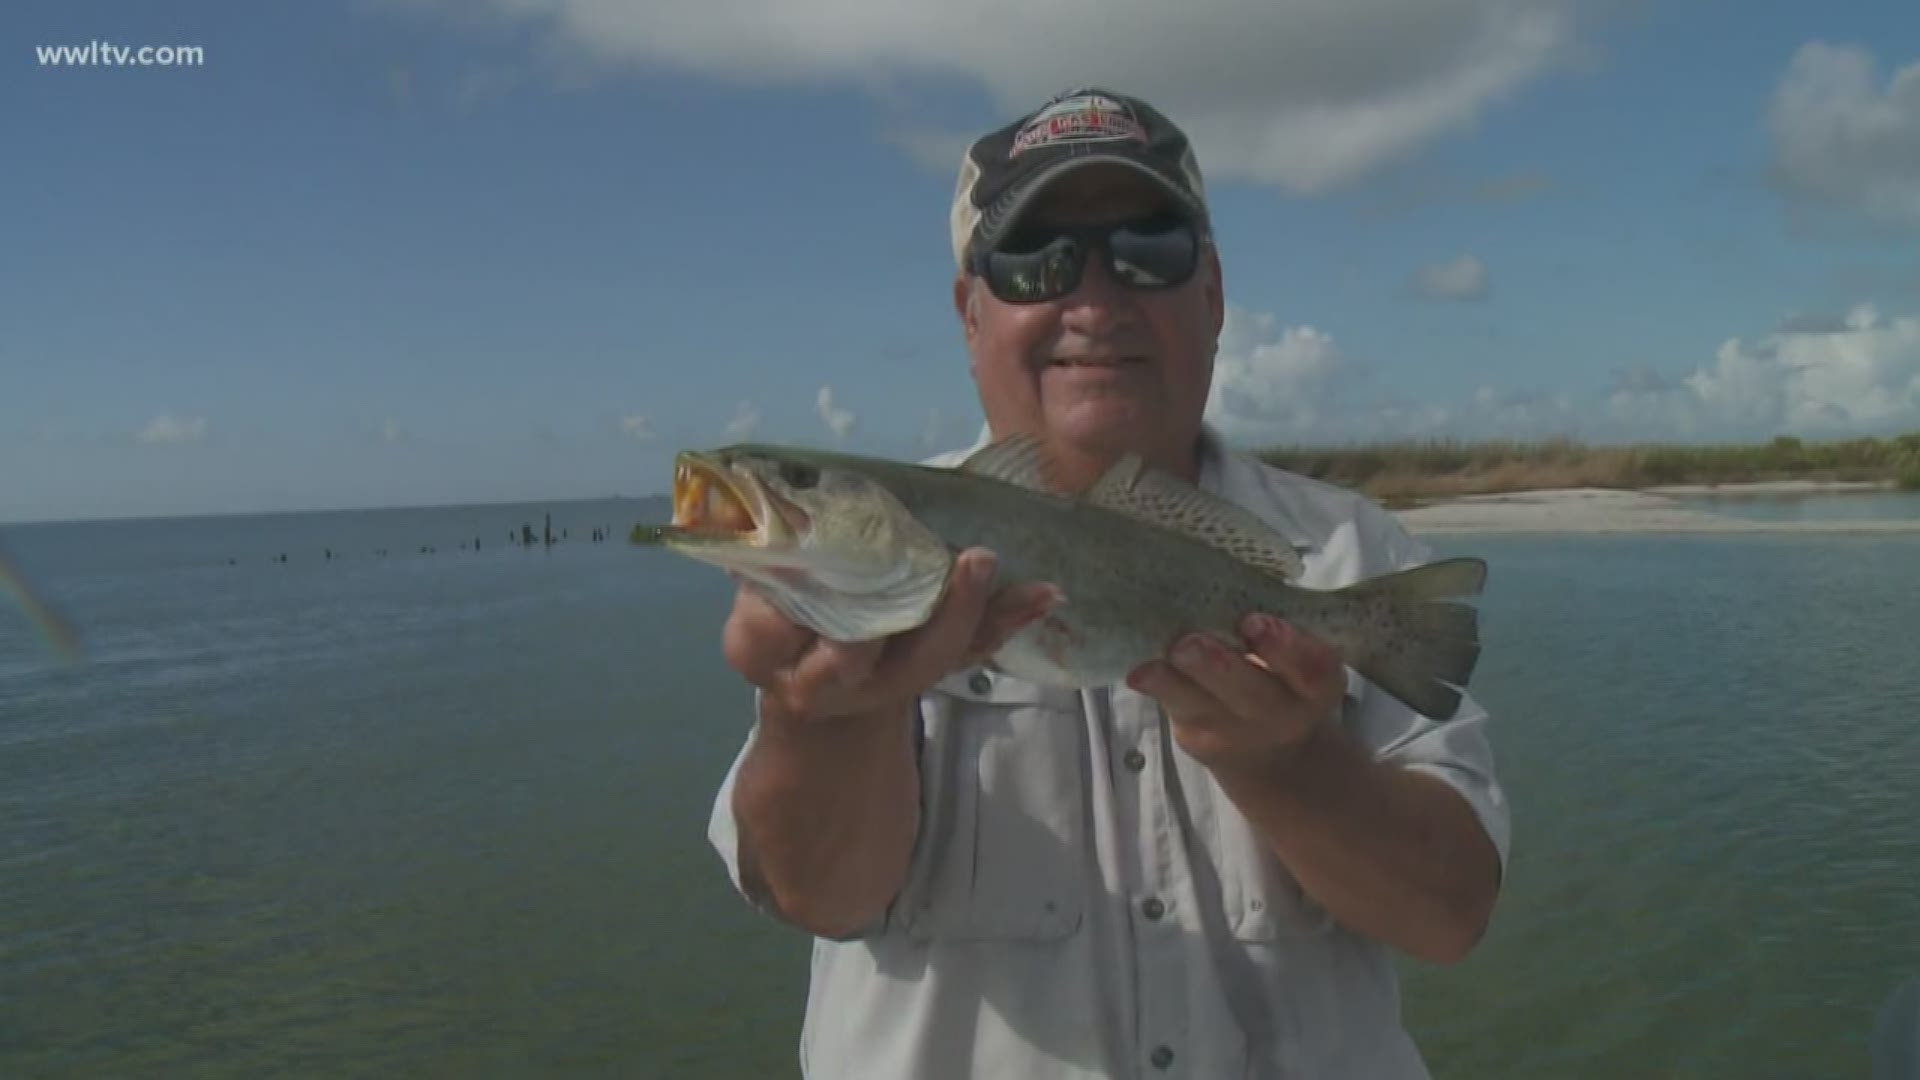 Don Debuc shows us whether or not Hurricane Barry affected the catch along the coast.